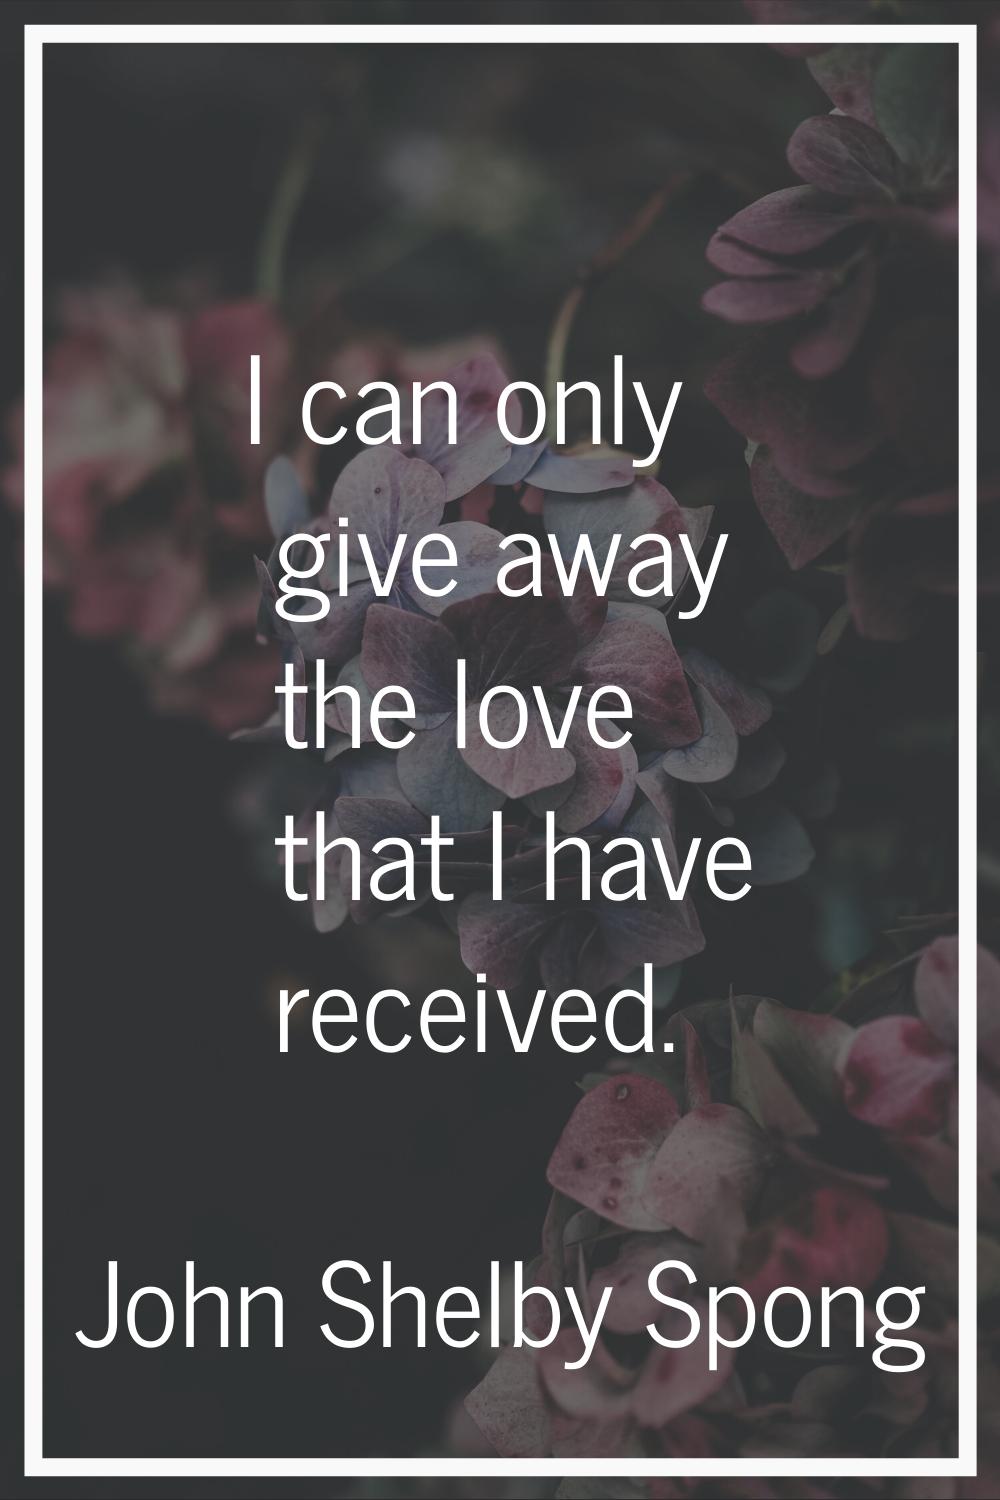 I can only give away the love that I have received.